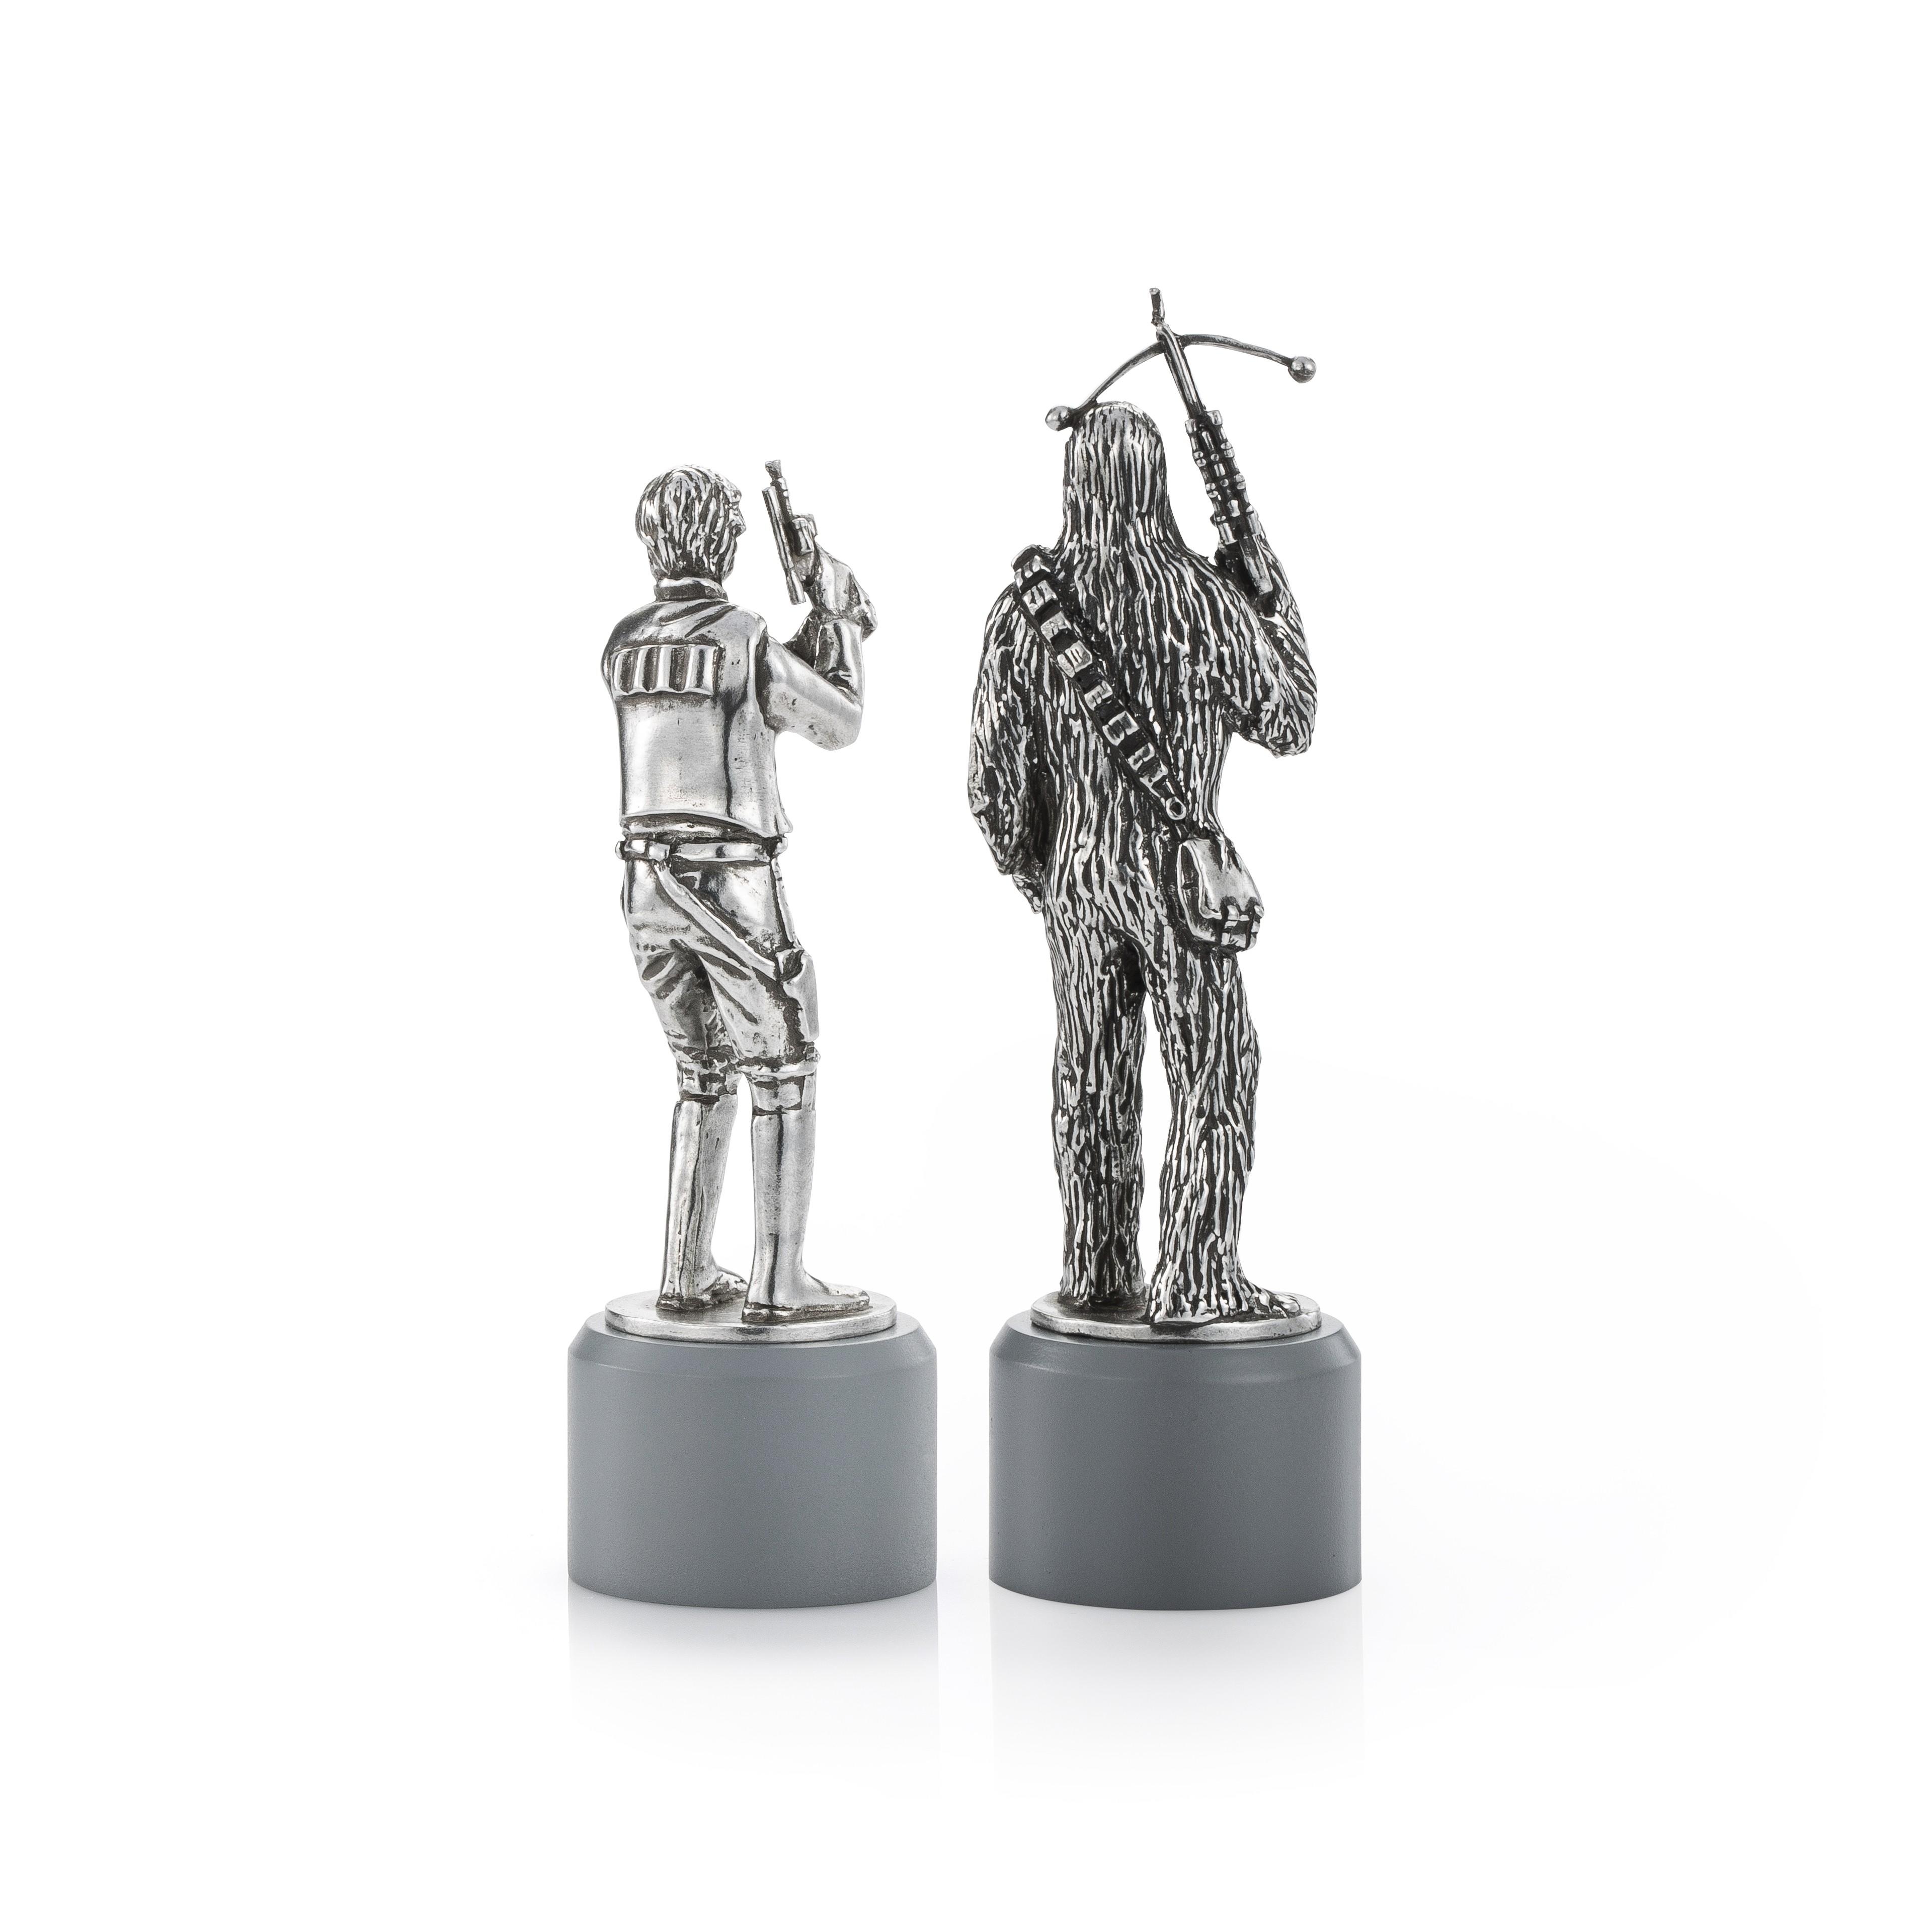 Han Solo & Chewbacca Bishop Chess Piece Pair